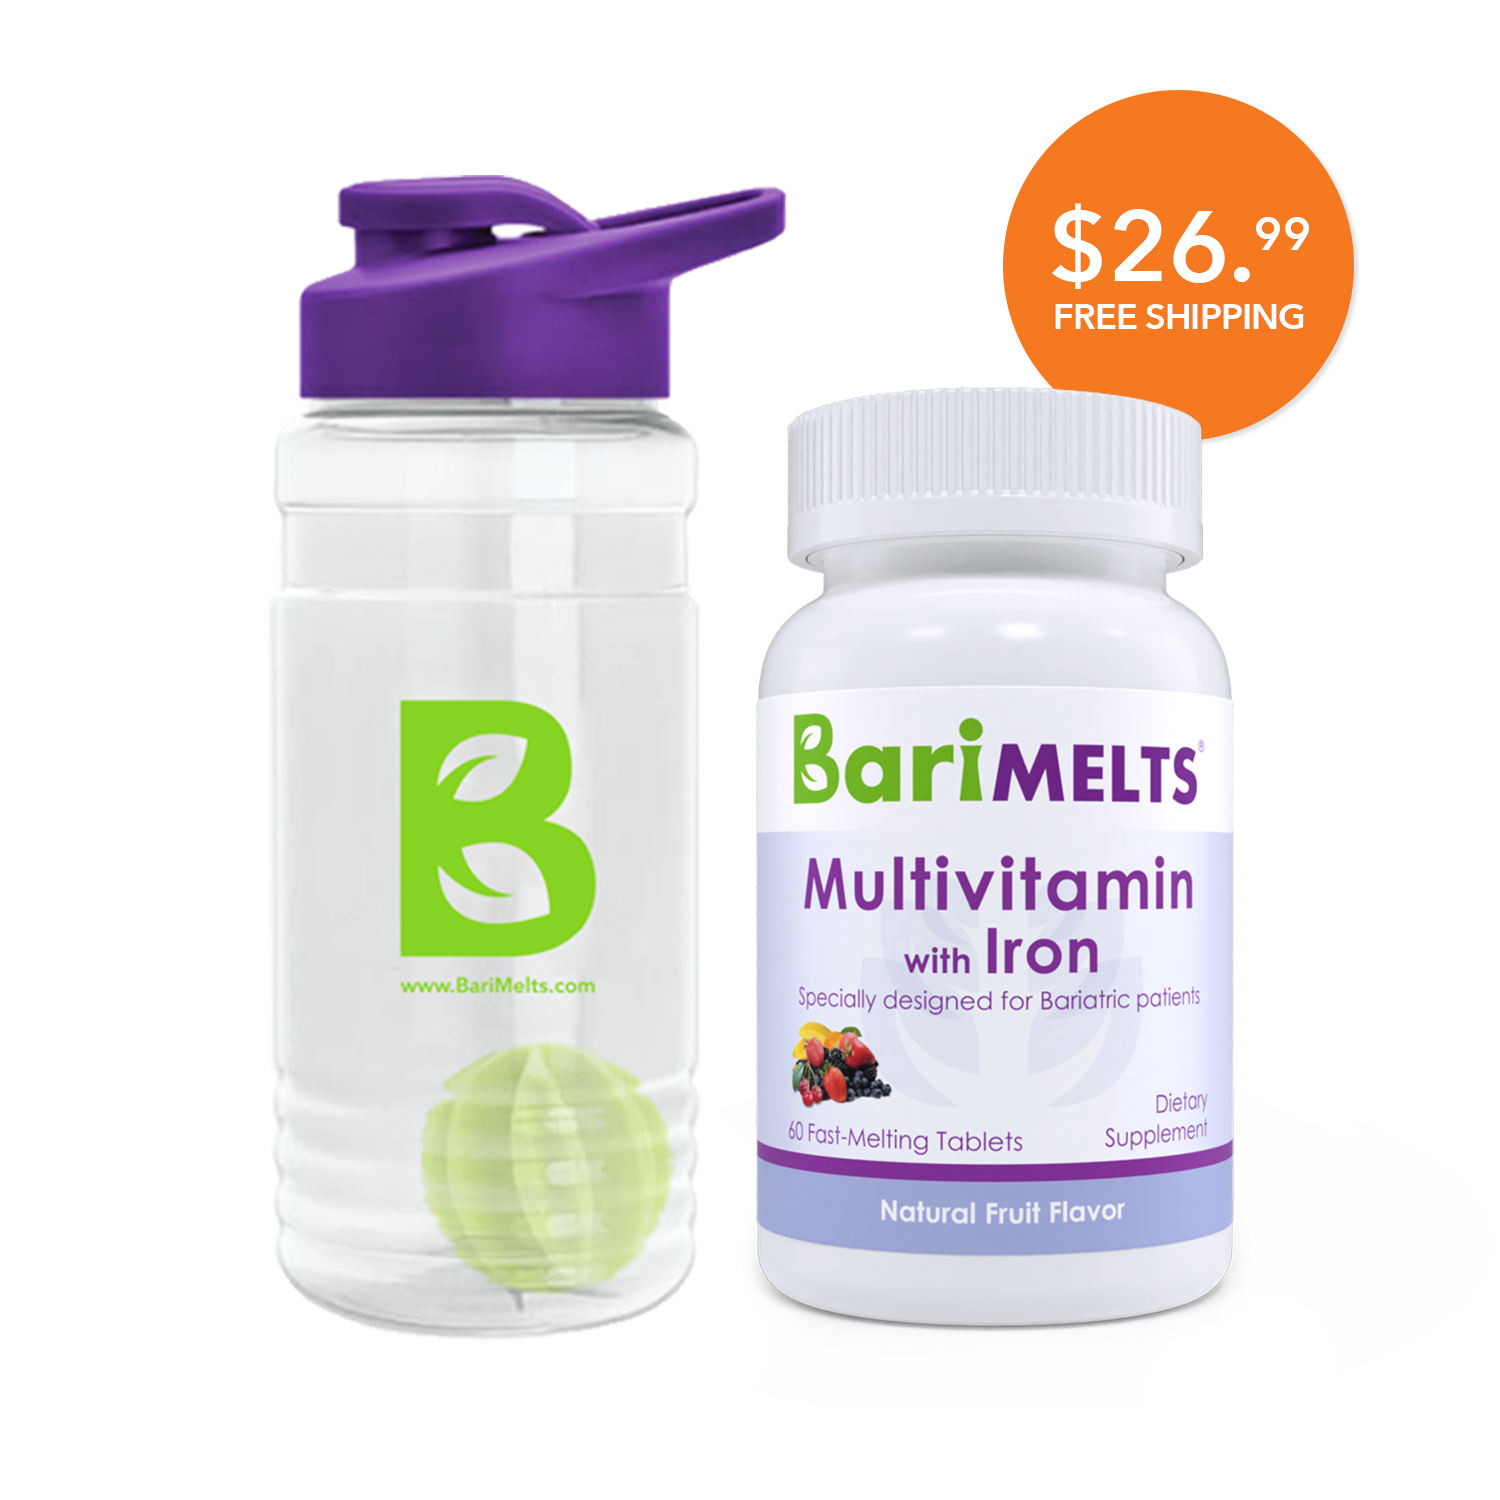 BariMelts Multivitamin with Iron Special Offer